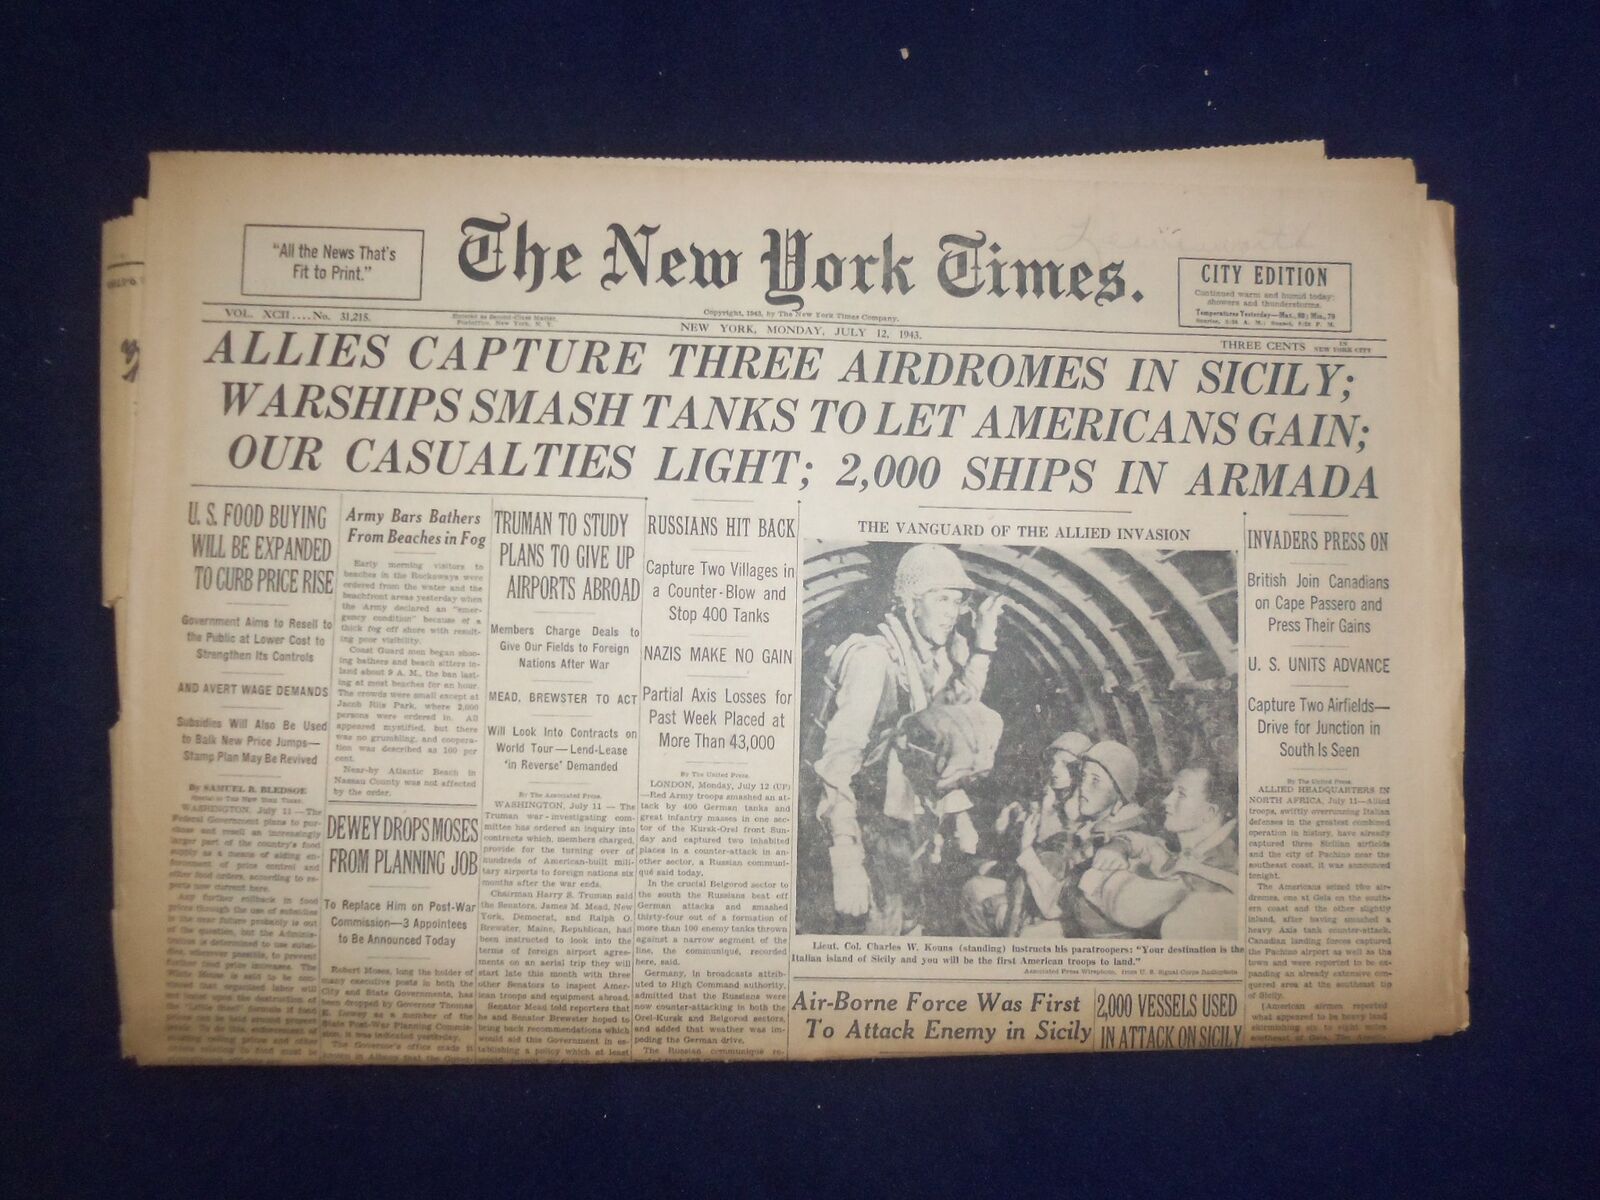 1943 JULY 12 NEW YORK TIMES - ALLIES CAPTURE THREE AIRDROMES IN SICILY - NP 6544